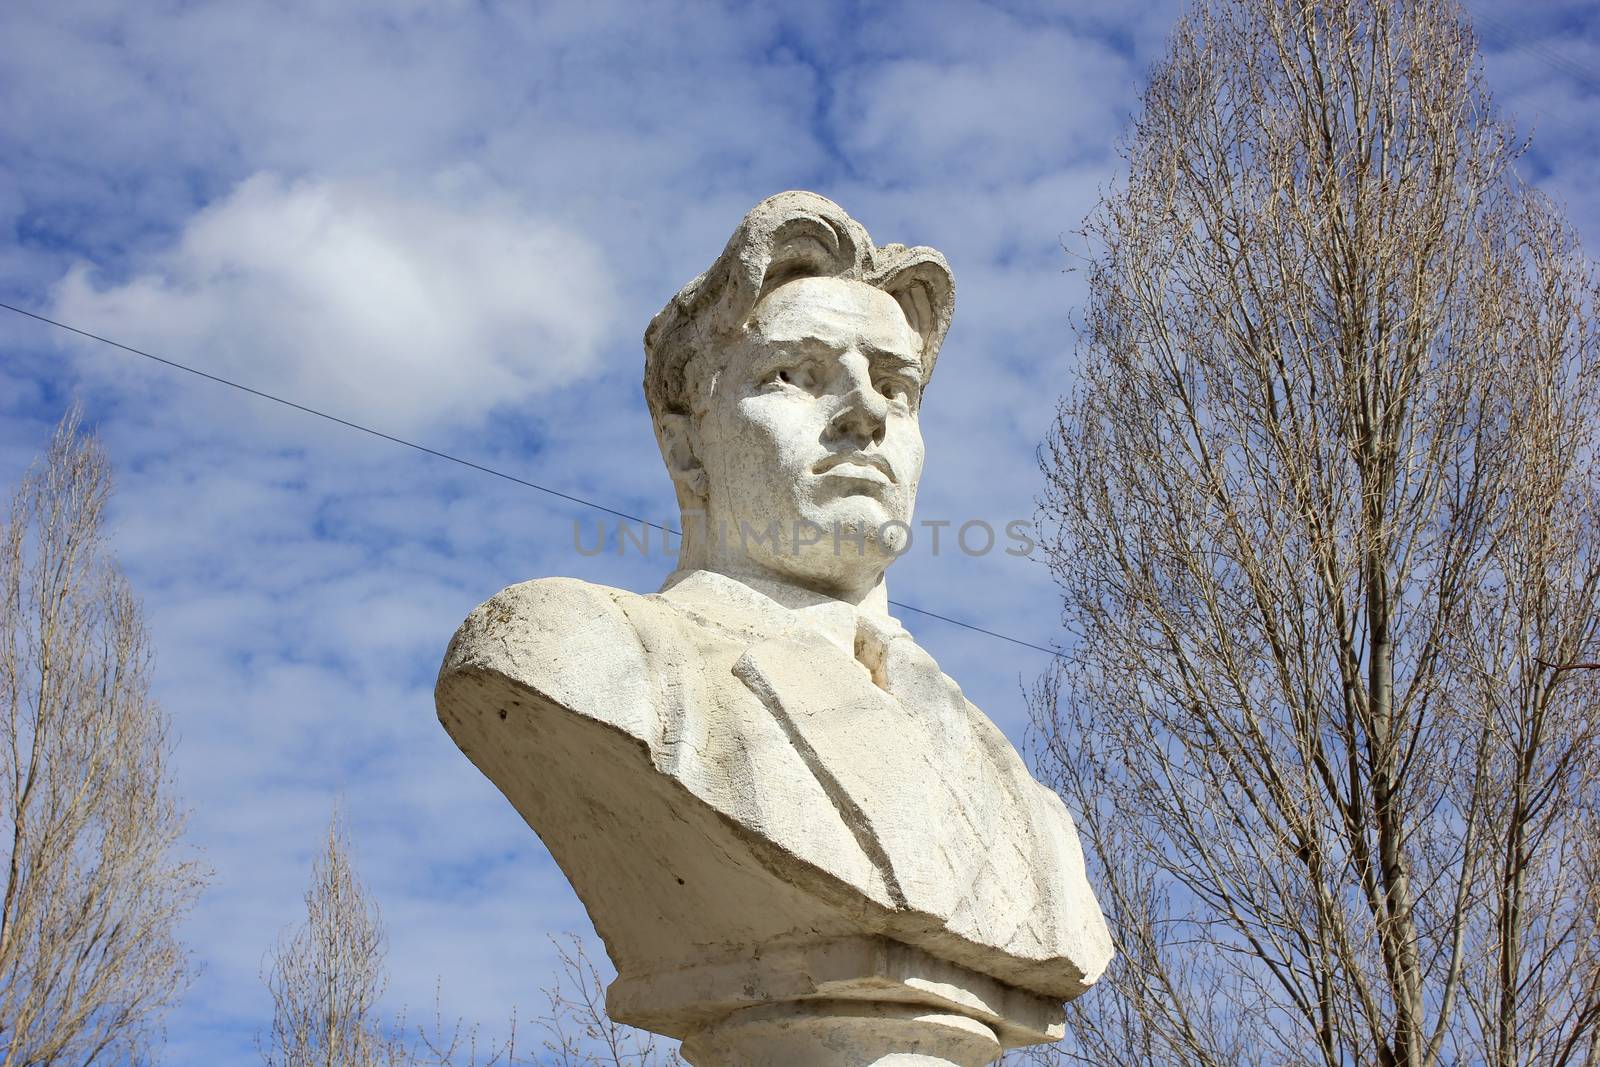 Bust of the Russian poet Mayakovsky in the yard at the building of high school in the city of Volgograd